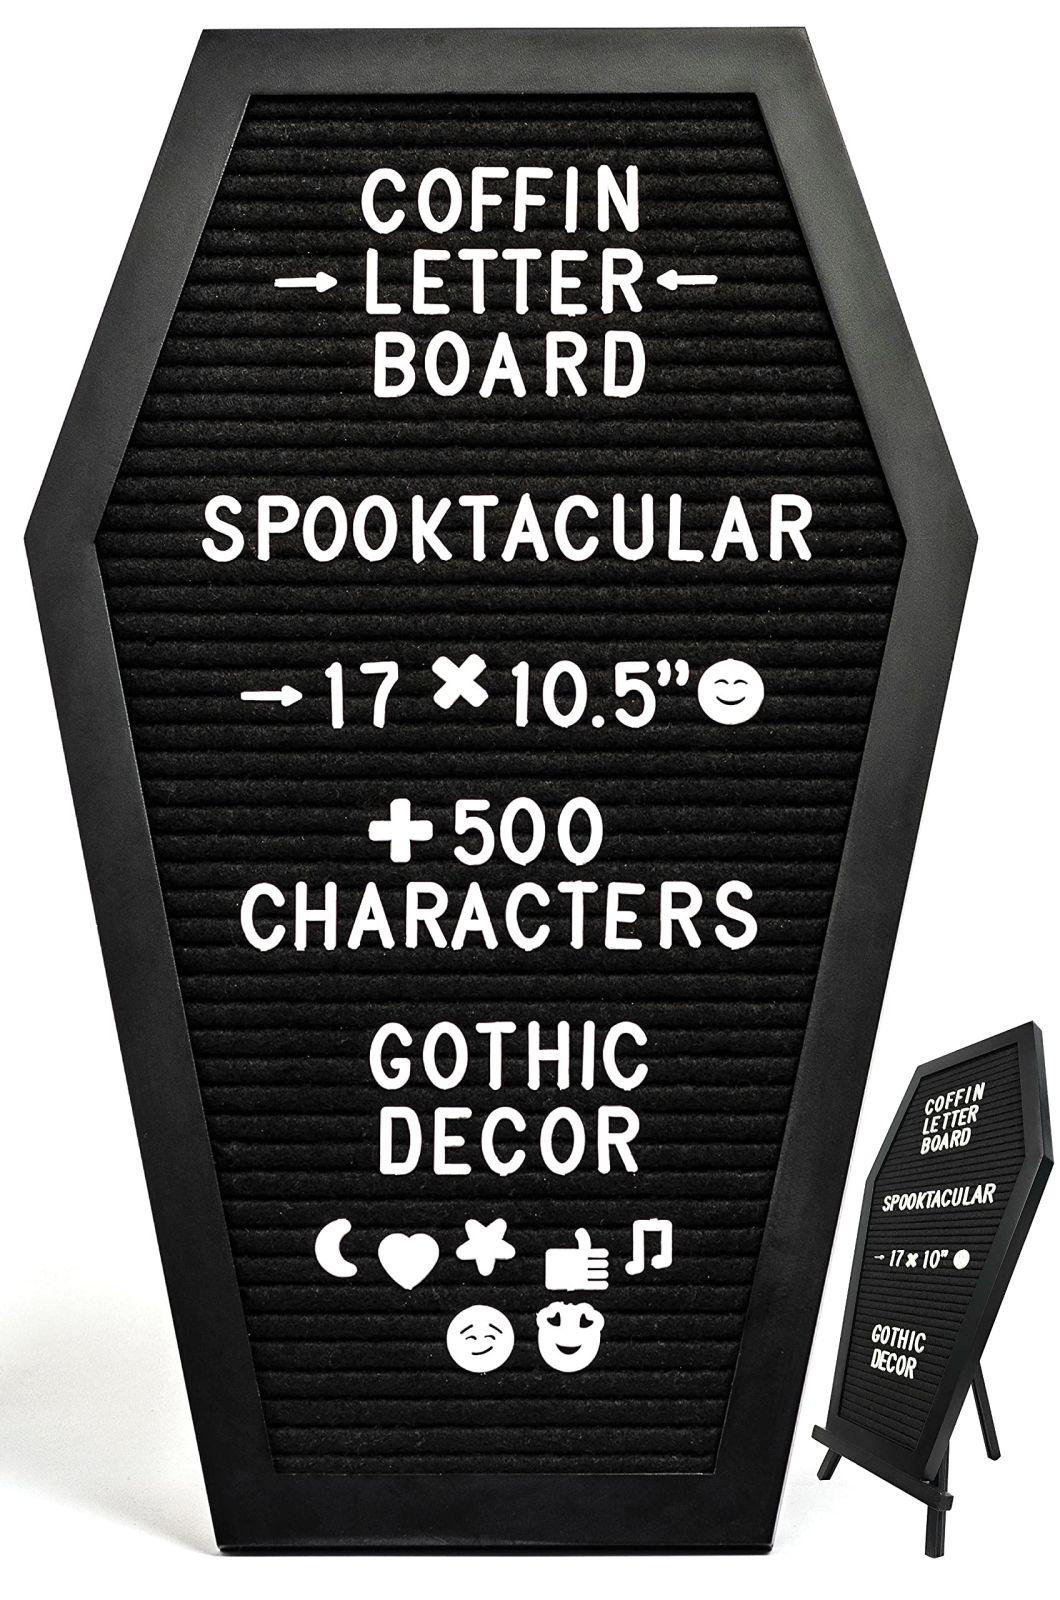 Black Felt Coffin Letter Board - Gothic Decor Message Board for Halloween Decorations - 17X10.5 Inches, 500 White Changeable Characters, Wooden Stand. Spooky Ha